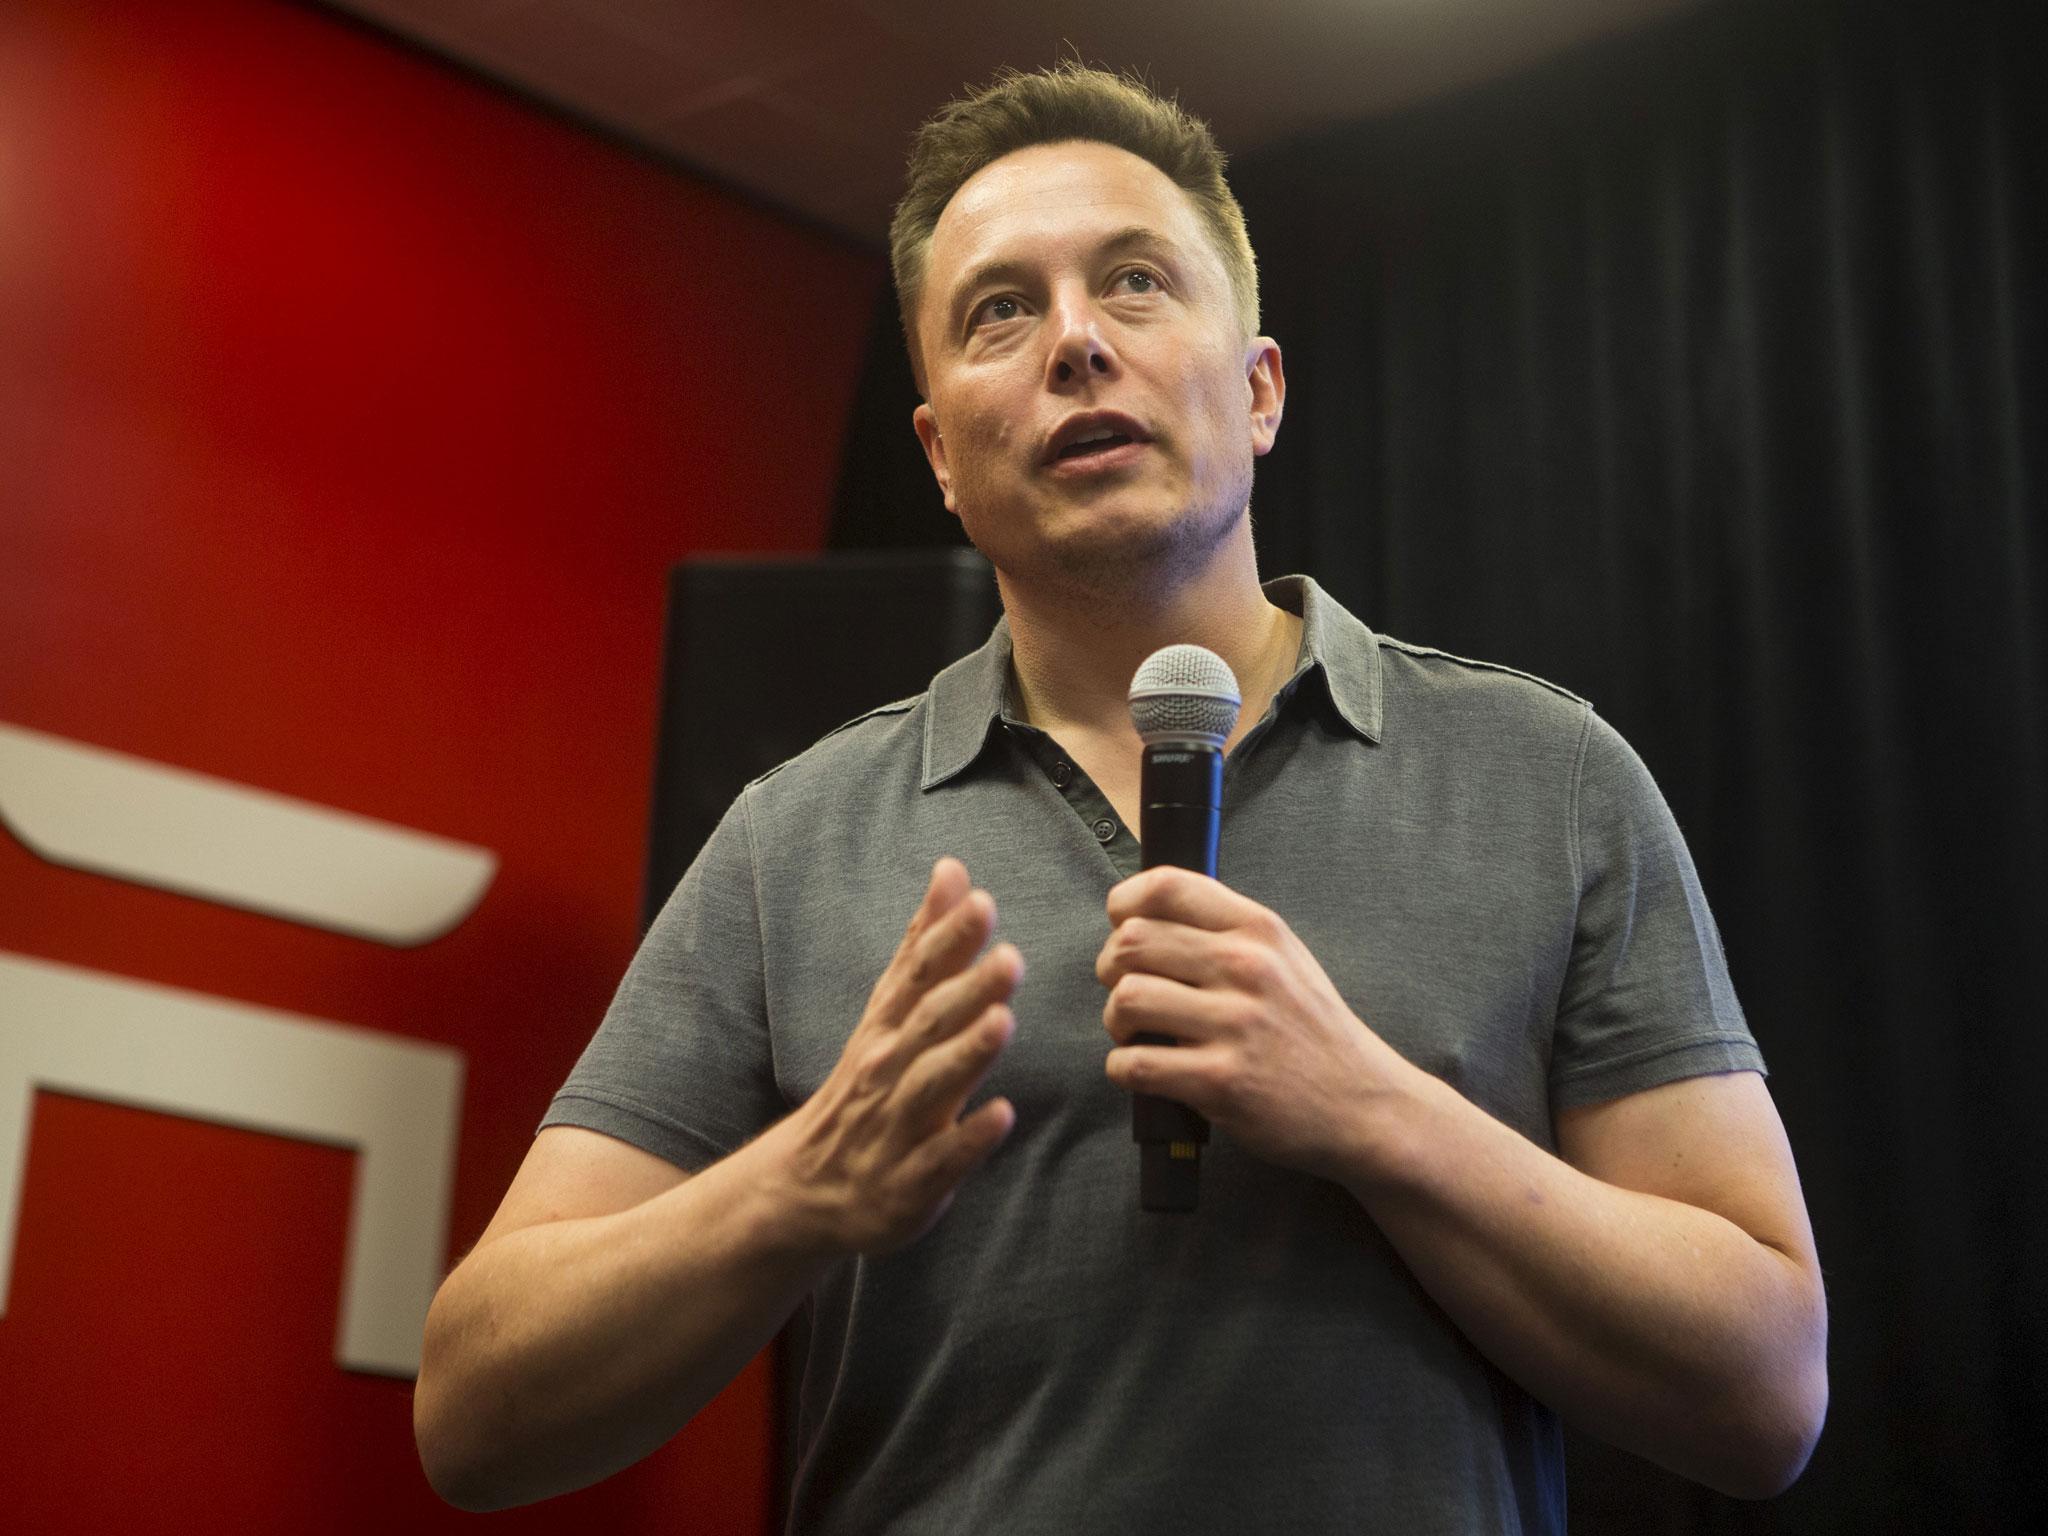 Musk says his main goals were centred on accelerating the global transition to sustainable energy and making “humanity a multi-planet civilisation”